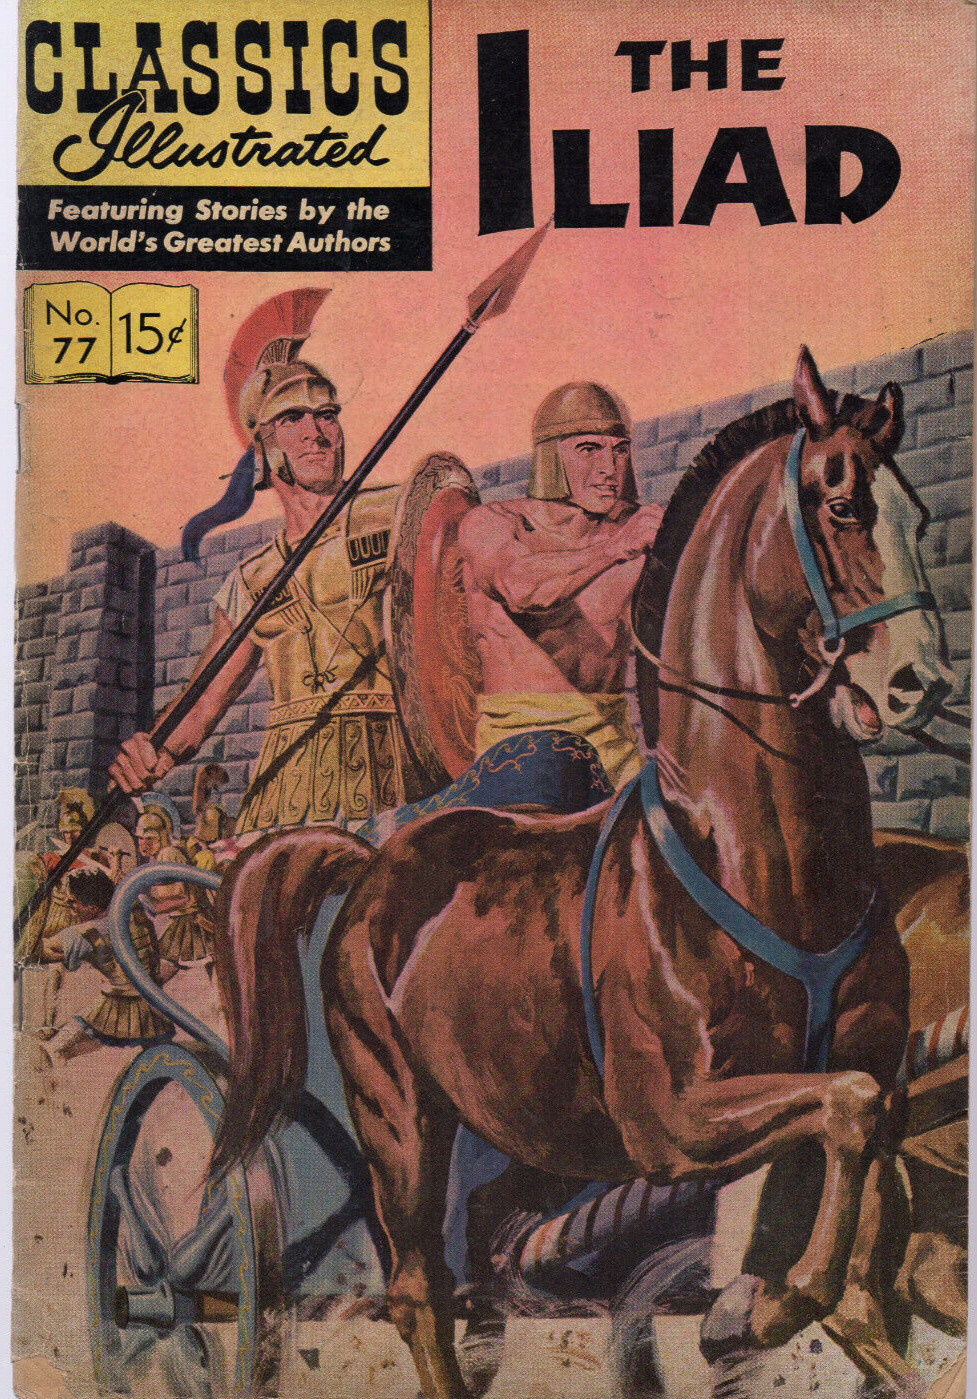 Classics Illustrated The Iliad by Homer #77  {1945) Very Good